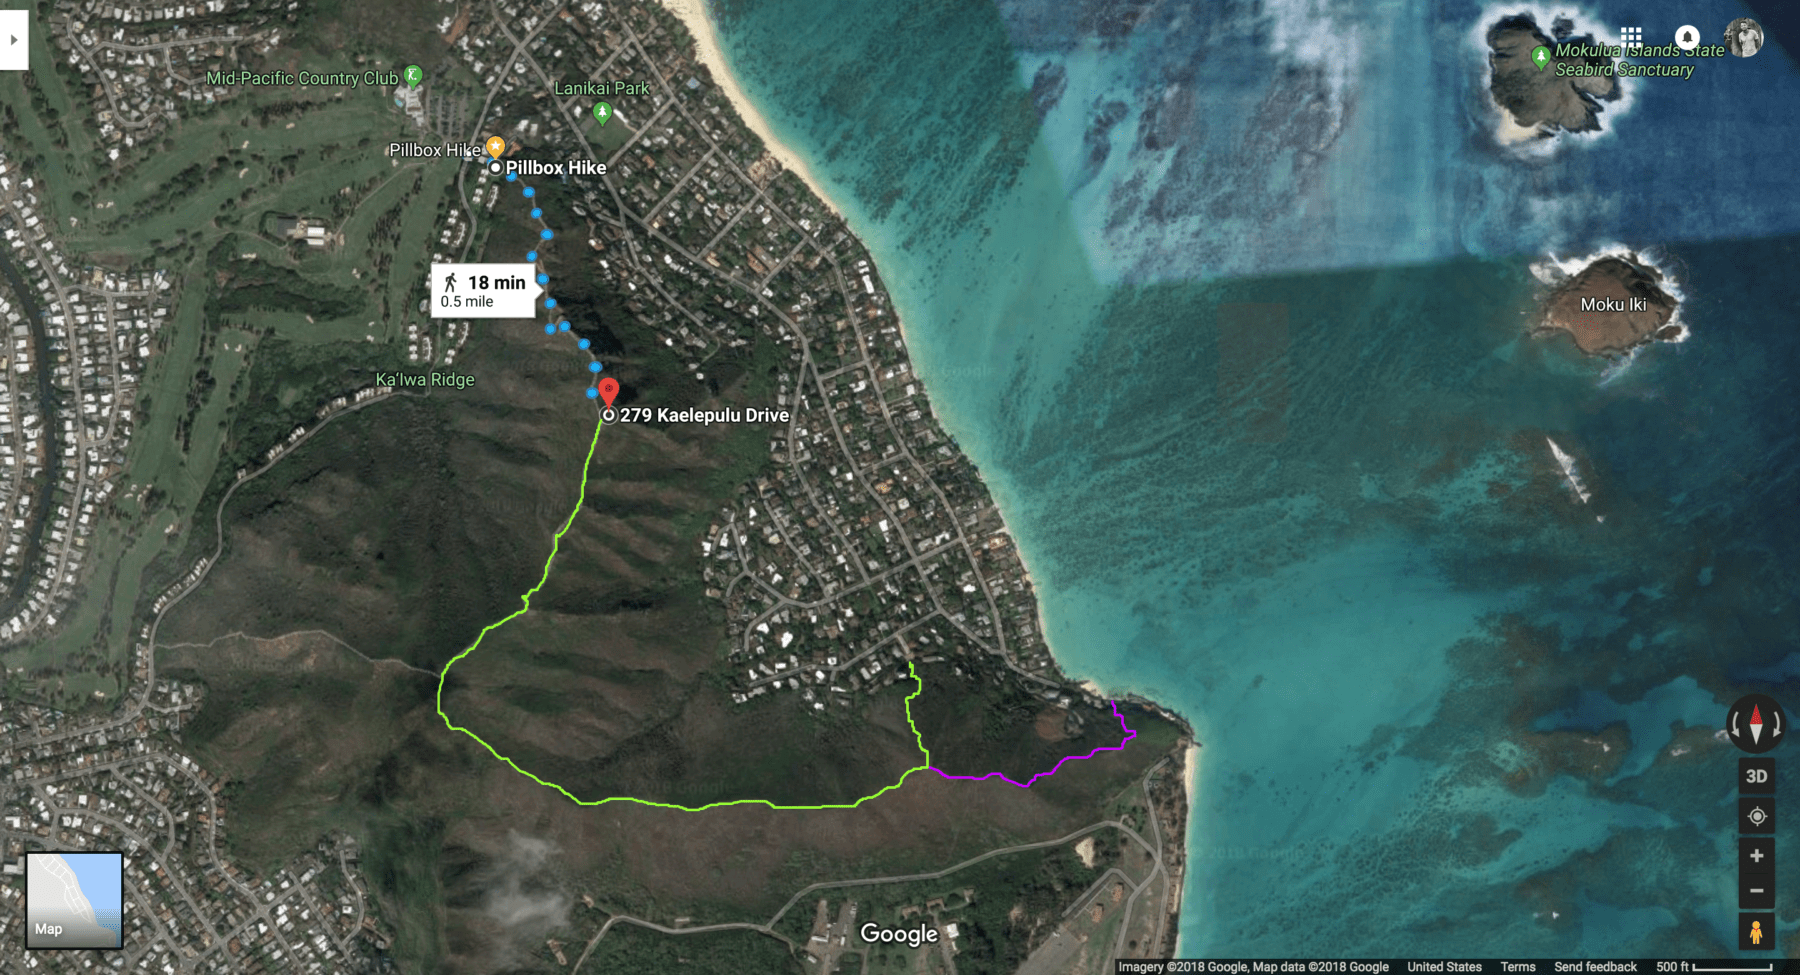 This map shows you the standard "Pillbox Hike" out-and-back trail as a blue dotted line. Lauren & I continued on along the Ka'aiwa Ridge which I've shown as a green line on the above map.